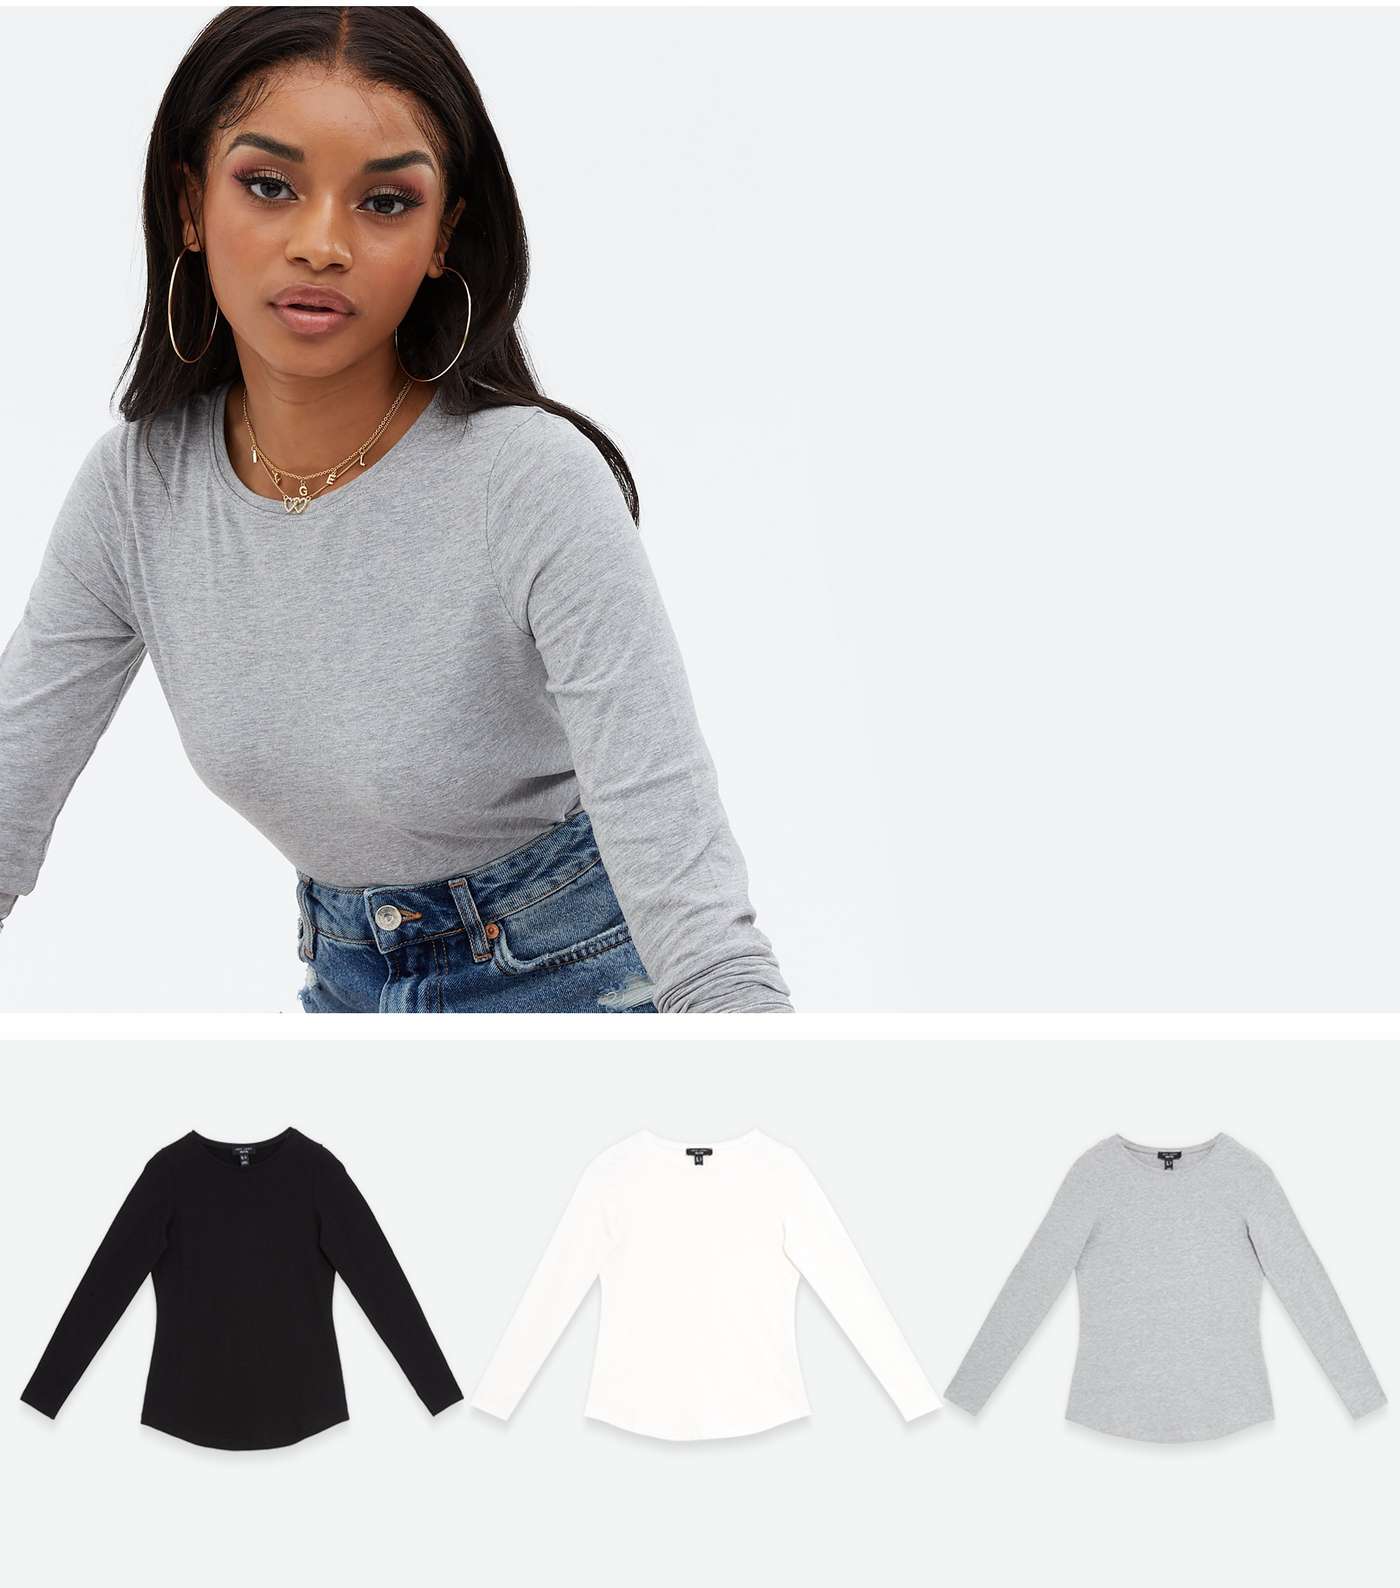 Petite 3 Pack Black White and Grey Long Sleeve Crew Tops